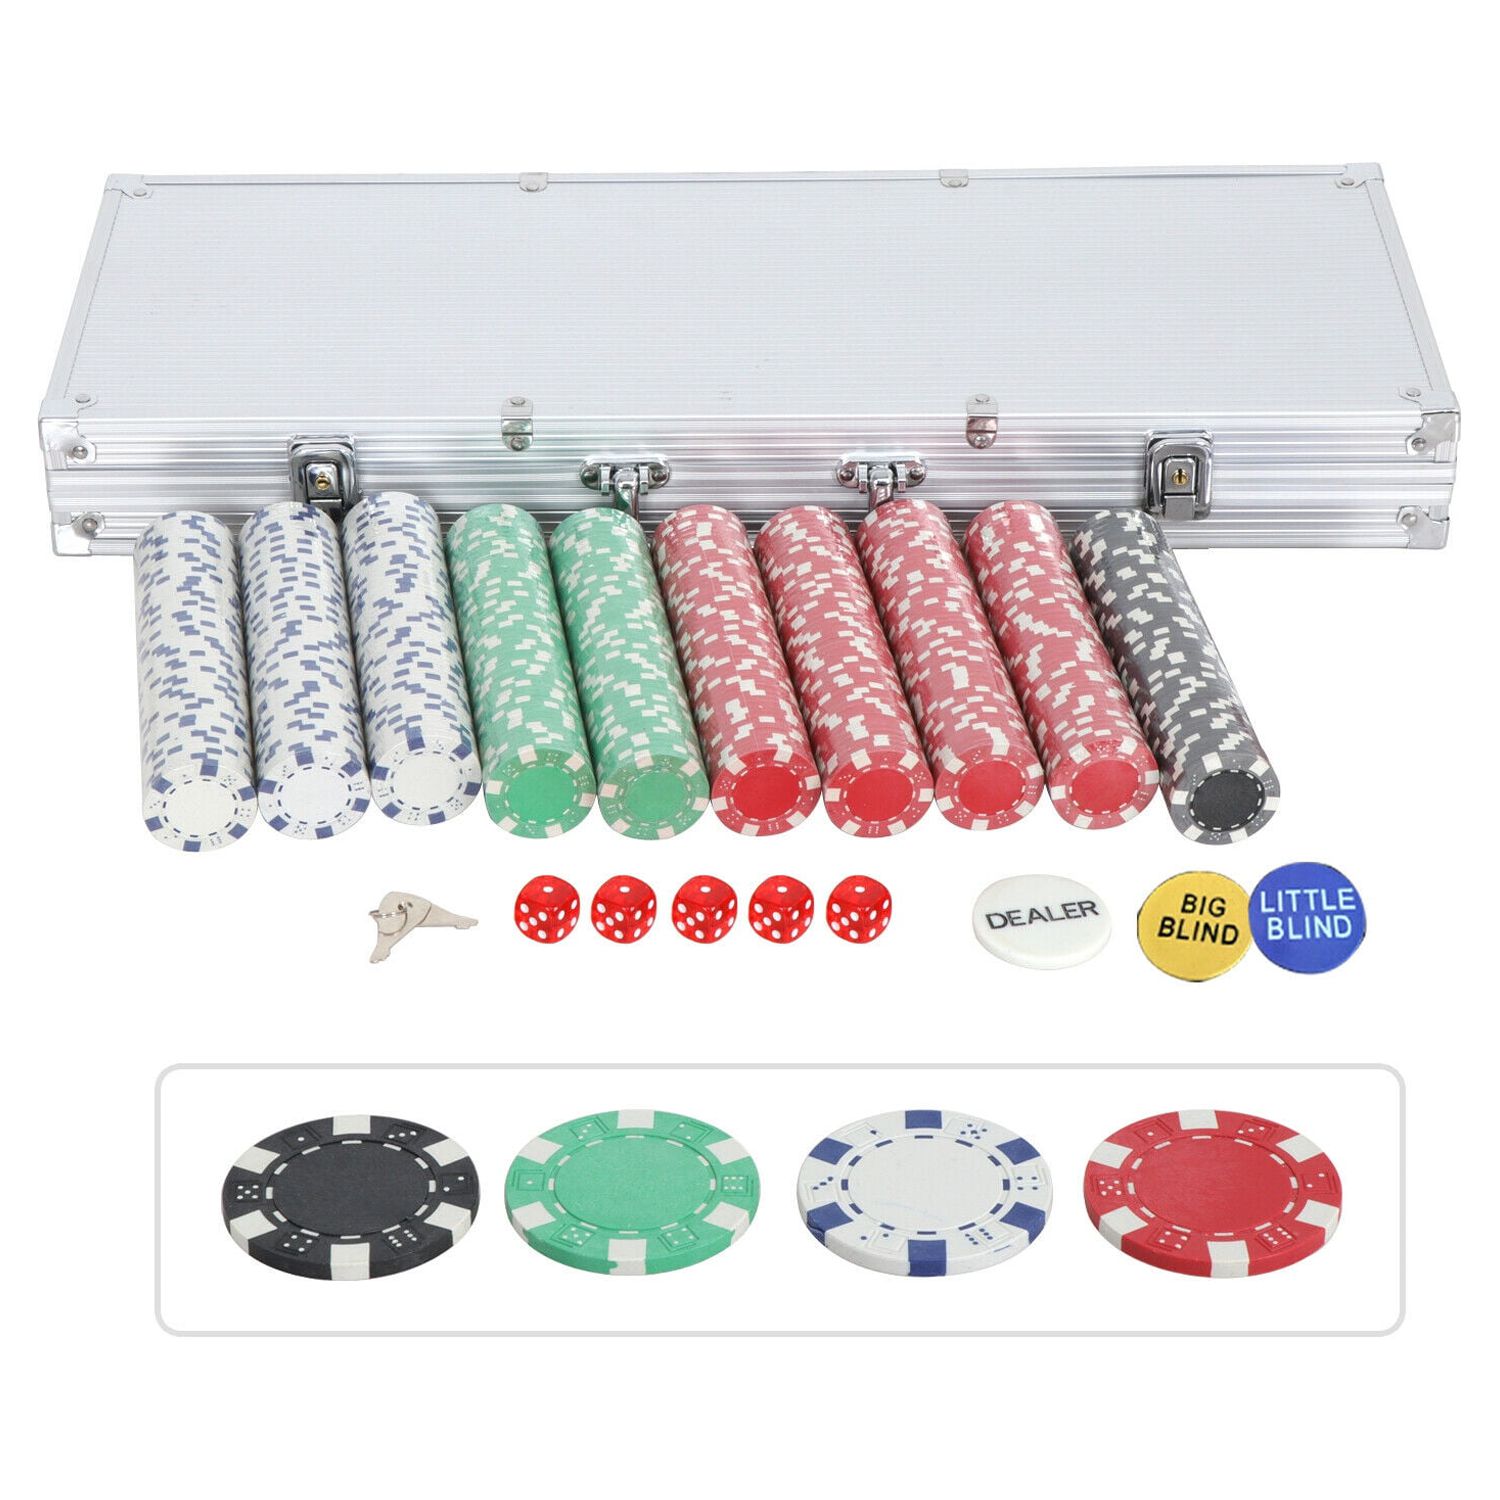 ZENY 500 Poker Chip Set 11.5 Gram Dice Style Aluminum Case, Cards, Dices, Blind Button - image 4 of 6